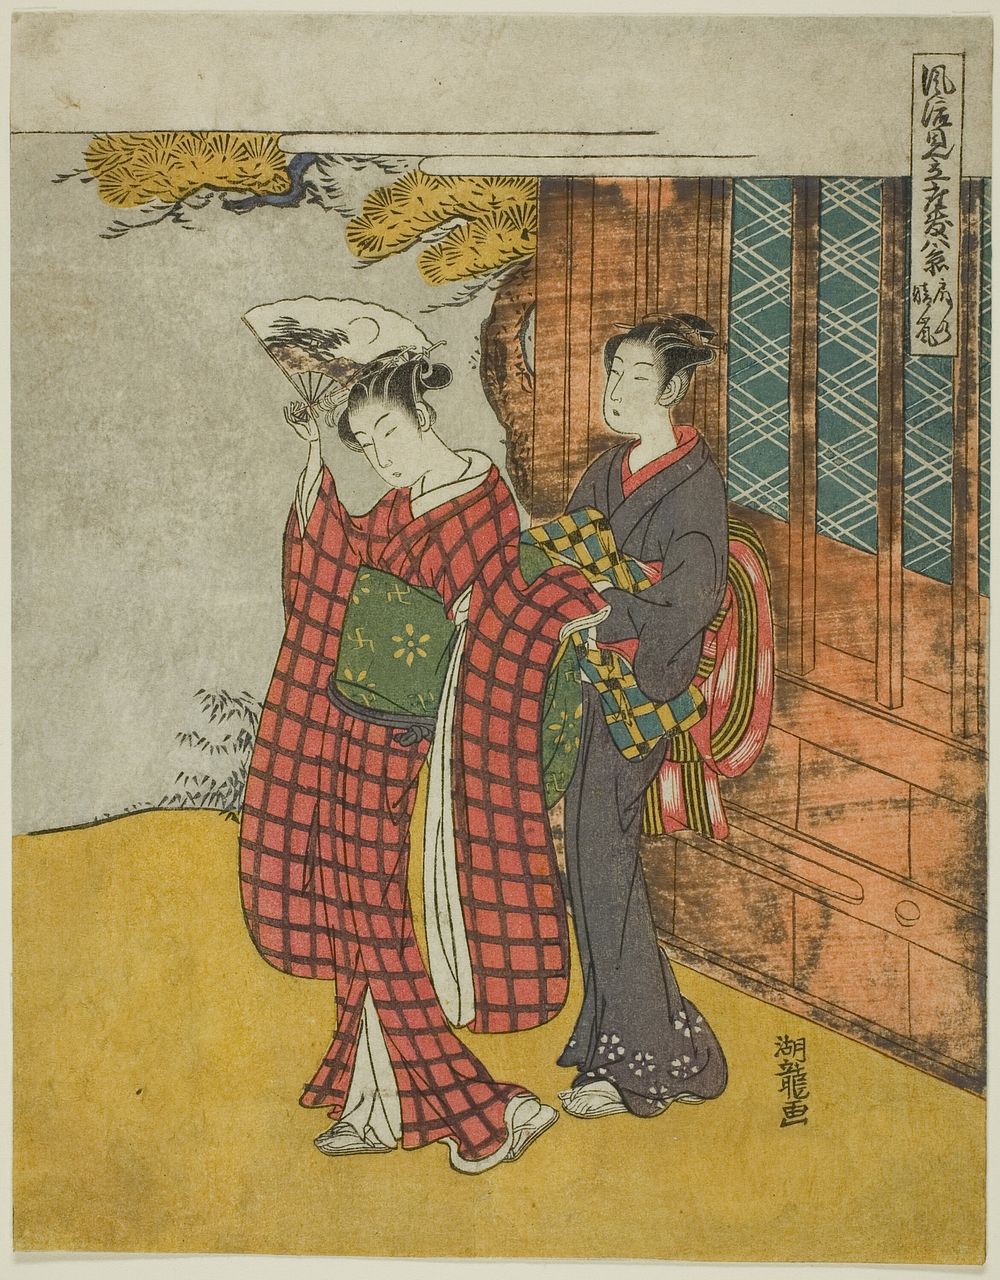 Clearing Weather of the Fan (Ogi no seiran), from the series "Fashionable Parodies of the Eight Parlor Views (Furyu mitate…